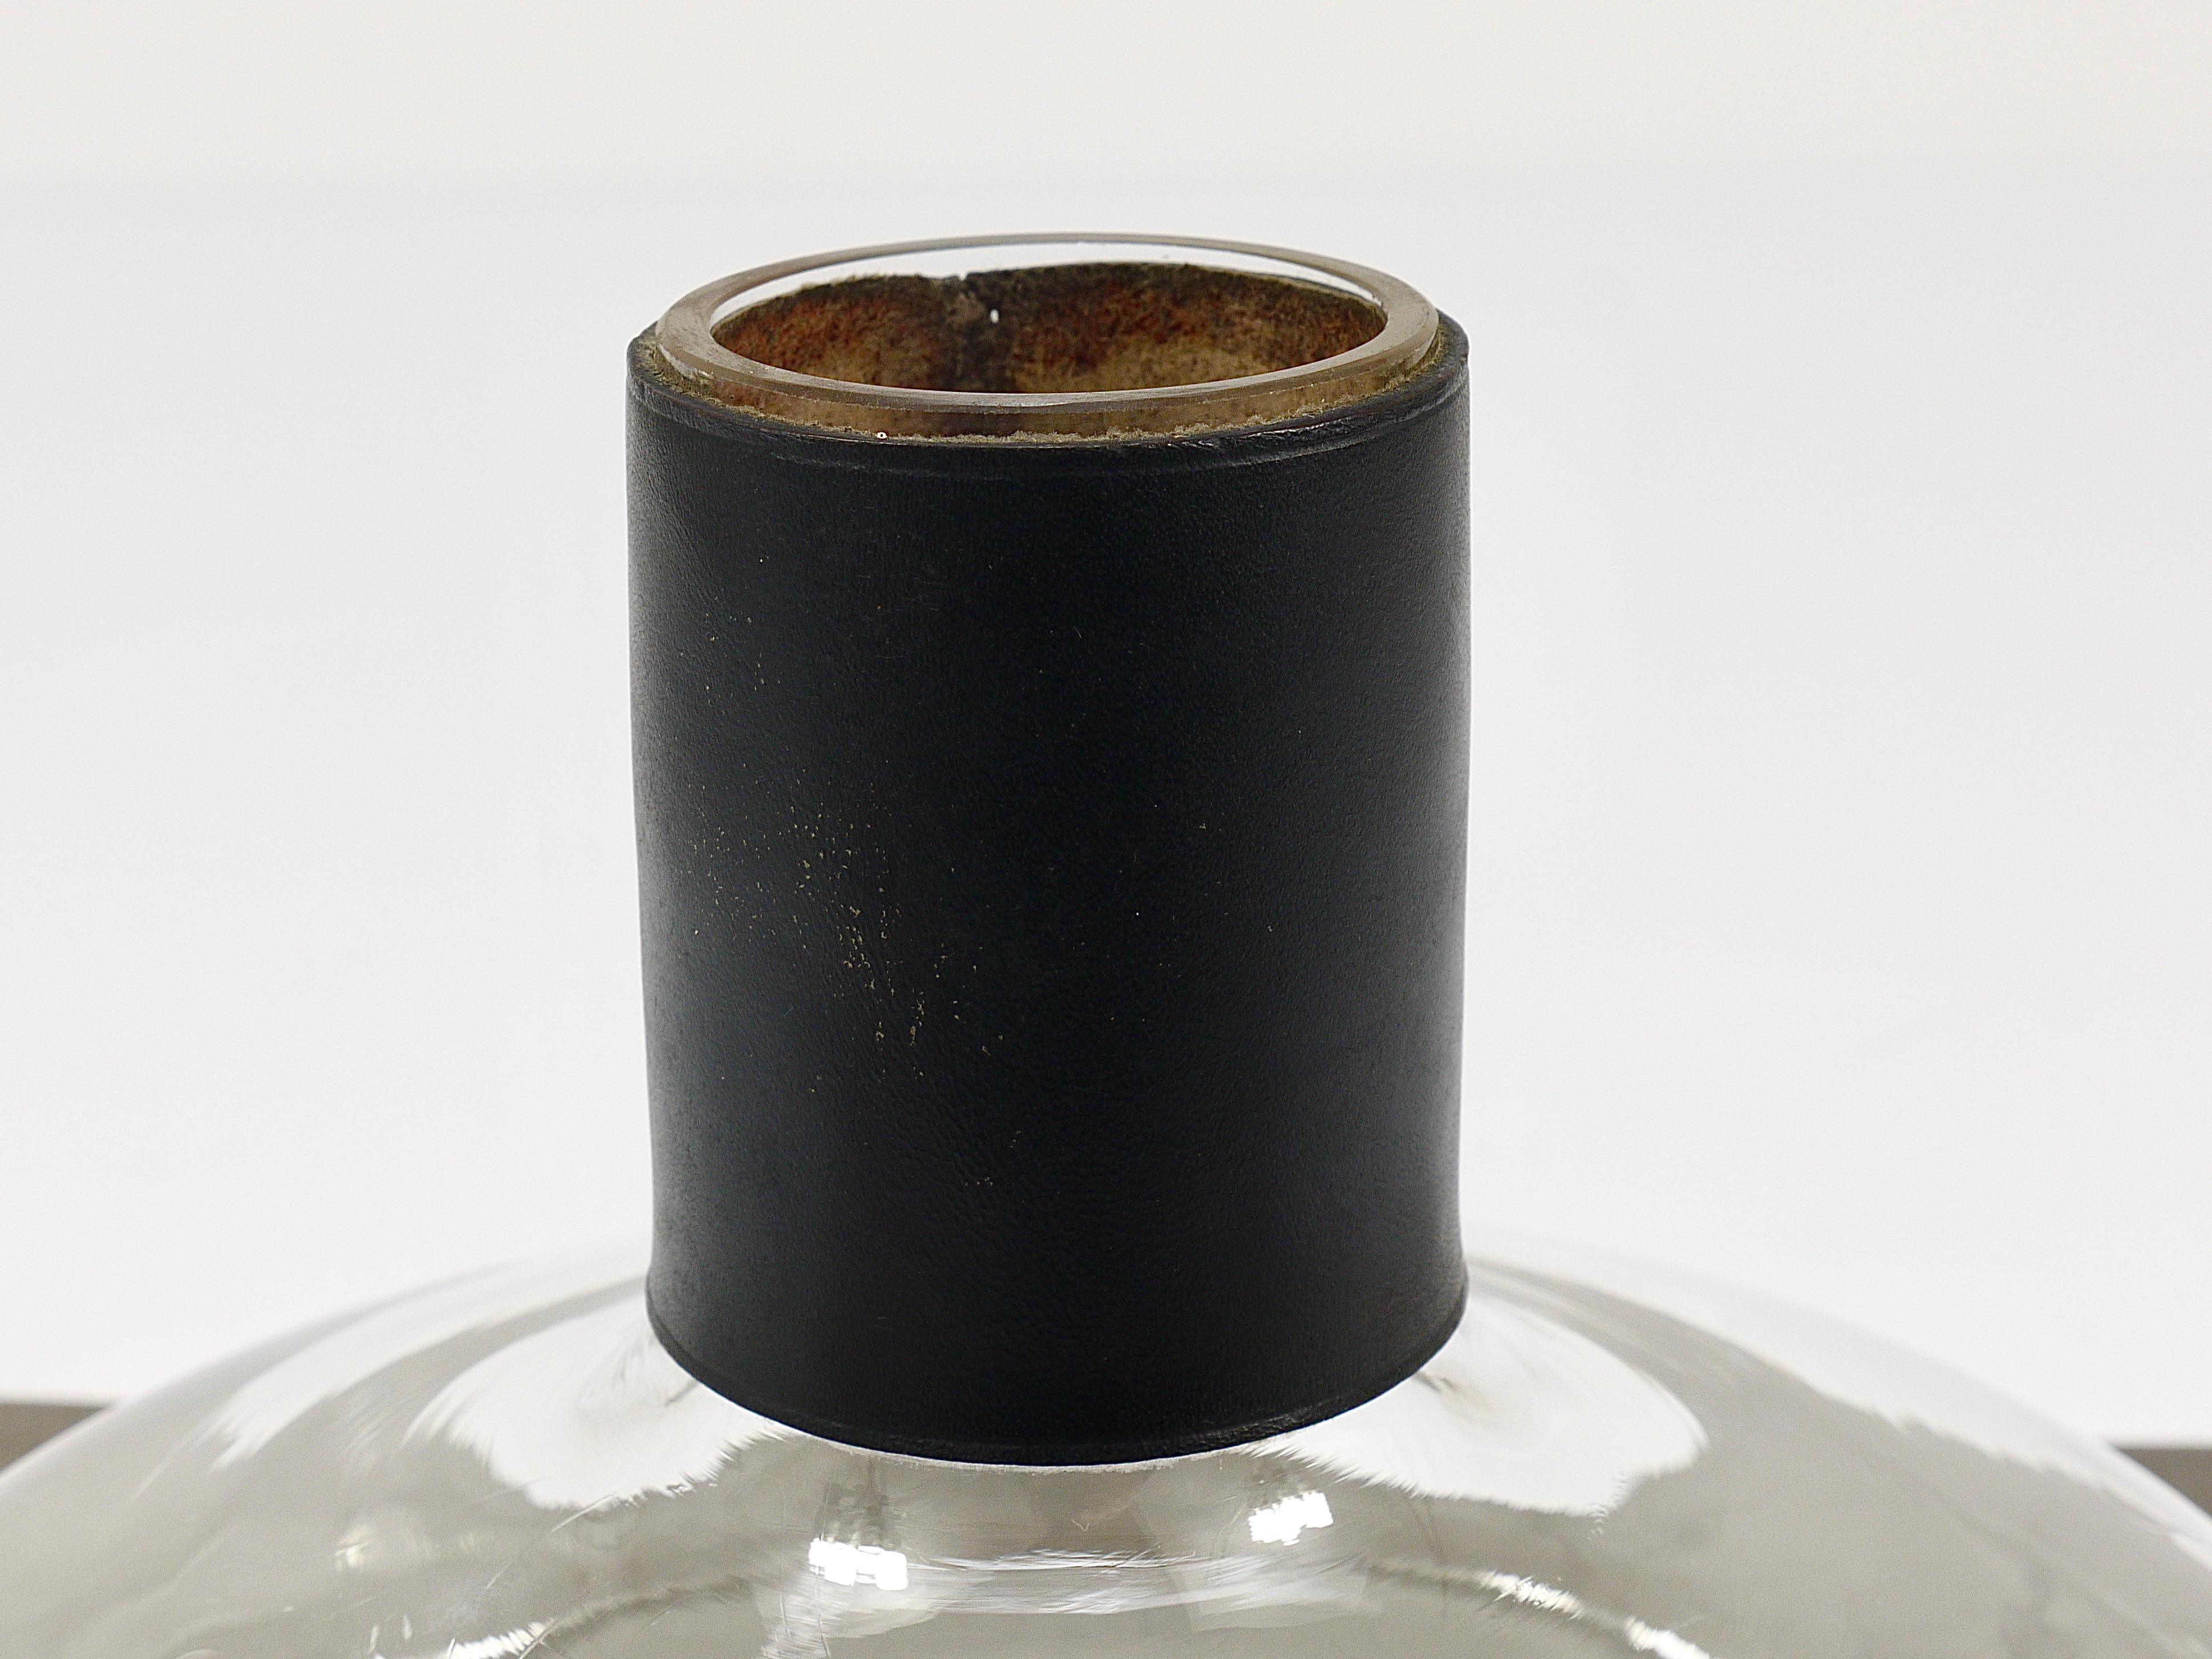 Carl Aubock II Vase Decanter with Black Leather Top, Midcentury, Austria, 1950s For Sale 2